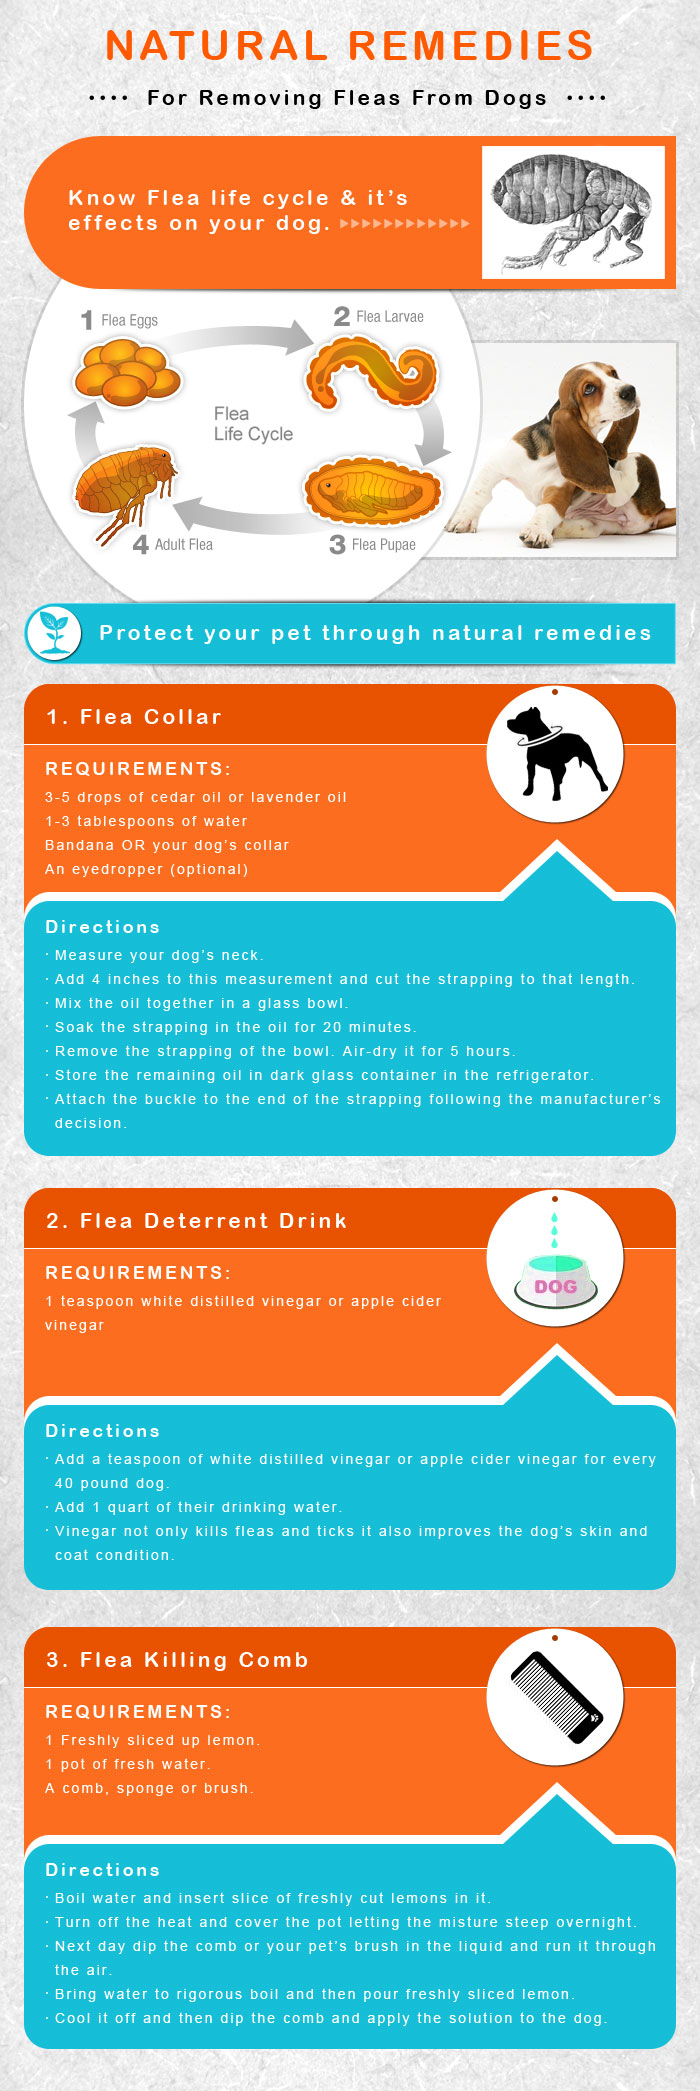 Flea & Tick Control and Prevention Products for Dogs